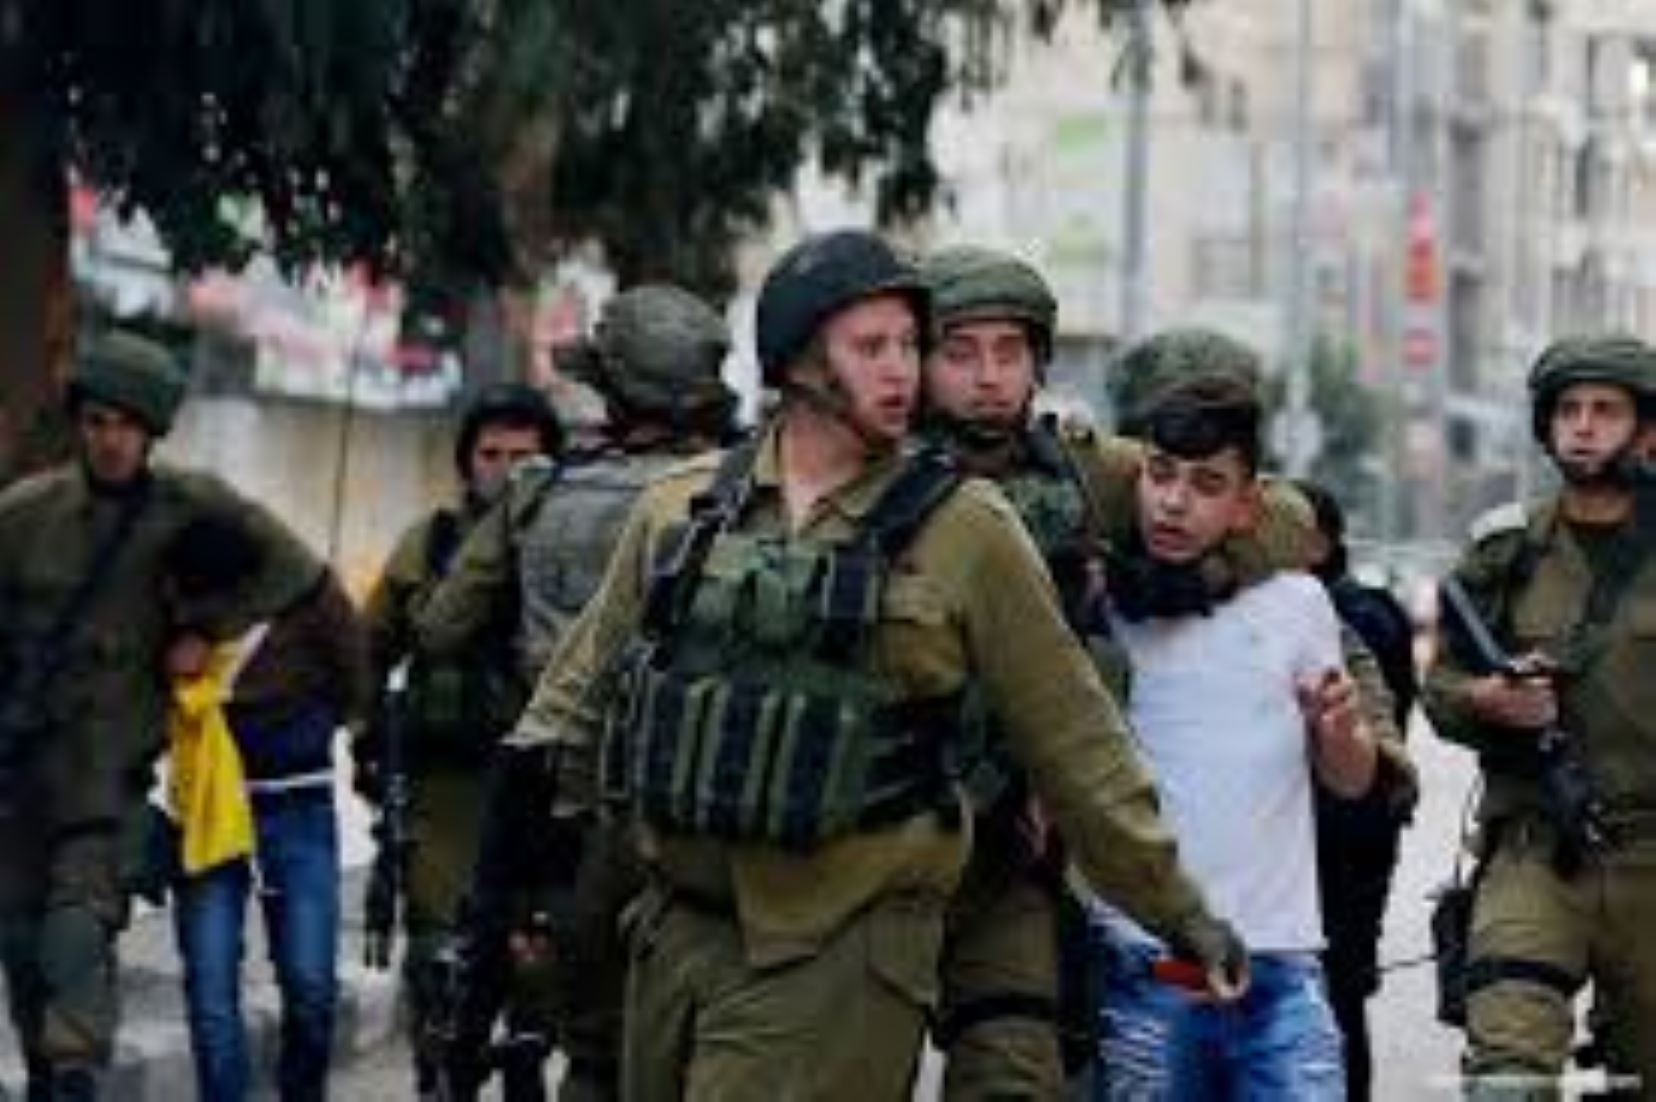 Israeli Army Arrested 13 Palestinians In Gaza In Sept: Palestinian Organisation